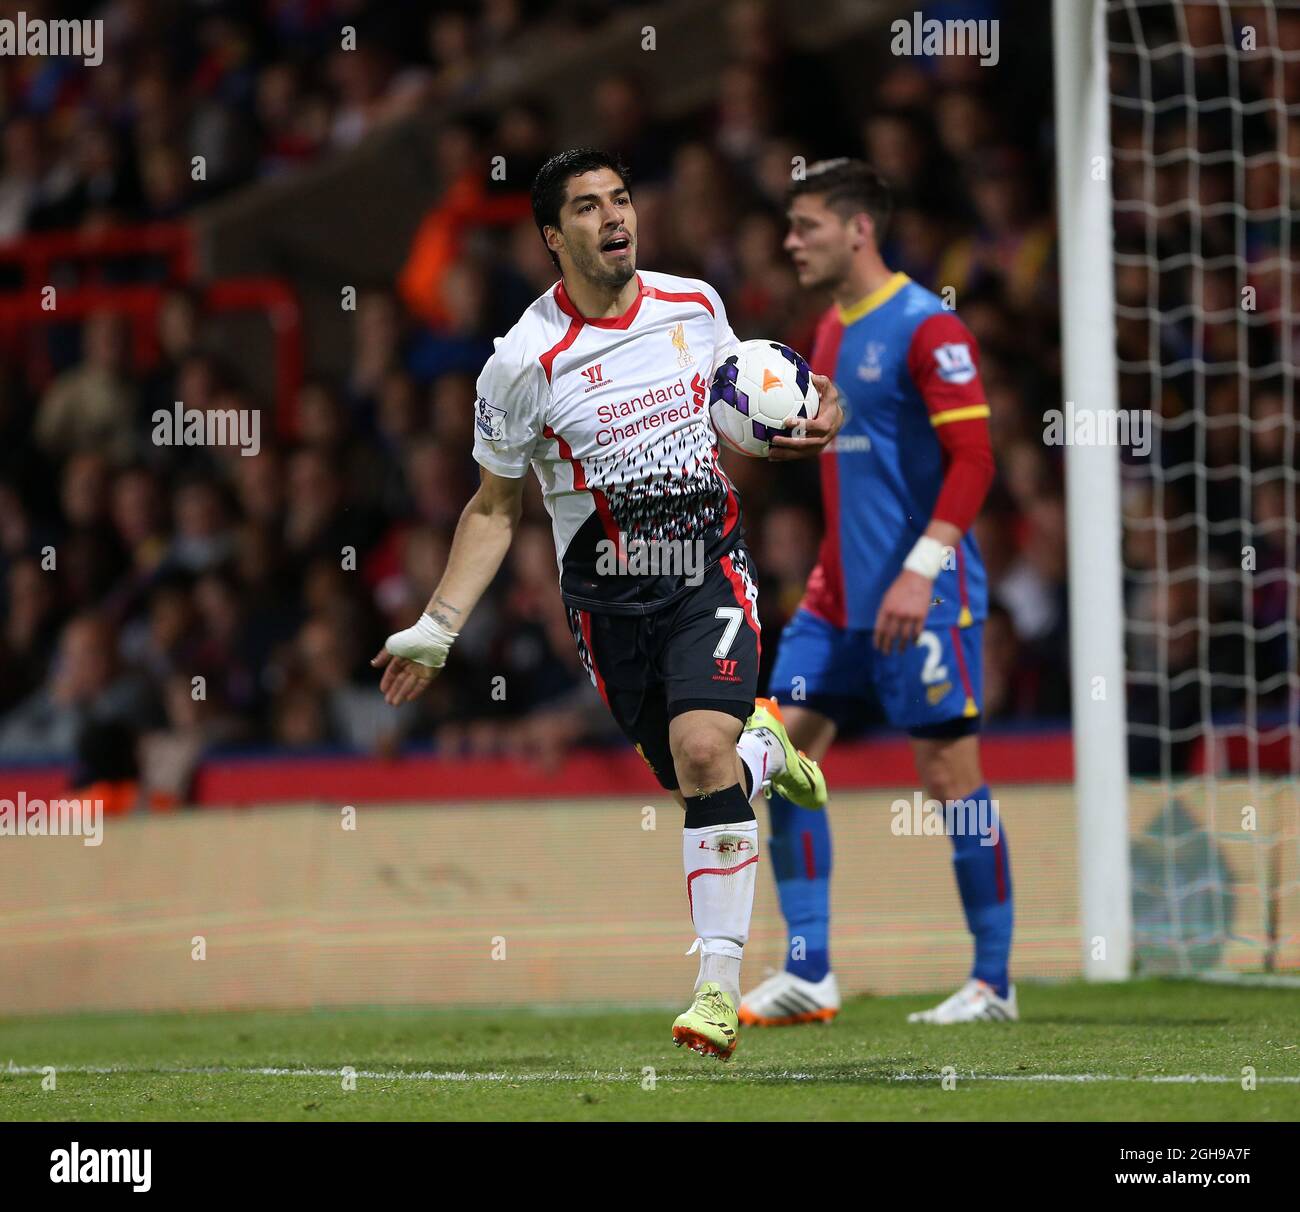 Liverpool's Luis Suarez celebrates scoring his sides third goal during the Barclays Premier League match between Crystal Palace and Liverpool held at Selhurst Park in London, UK on May 05, 2014. Stock Photo